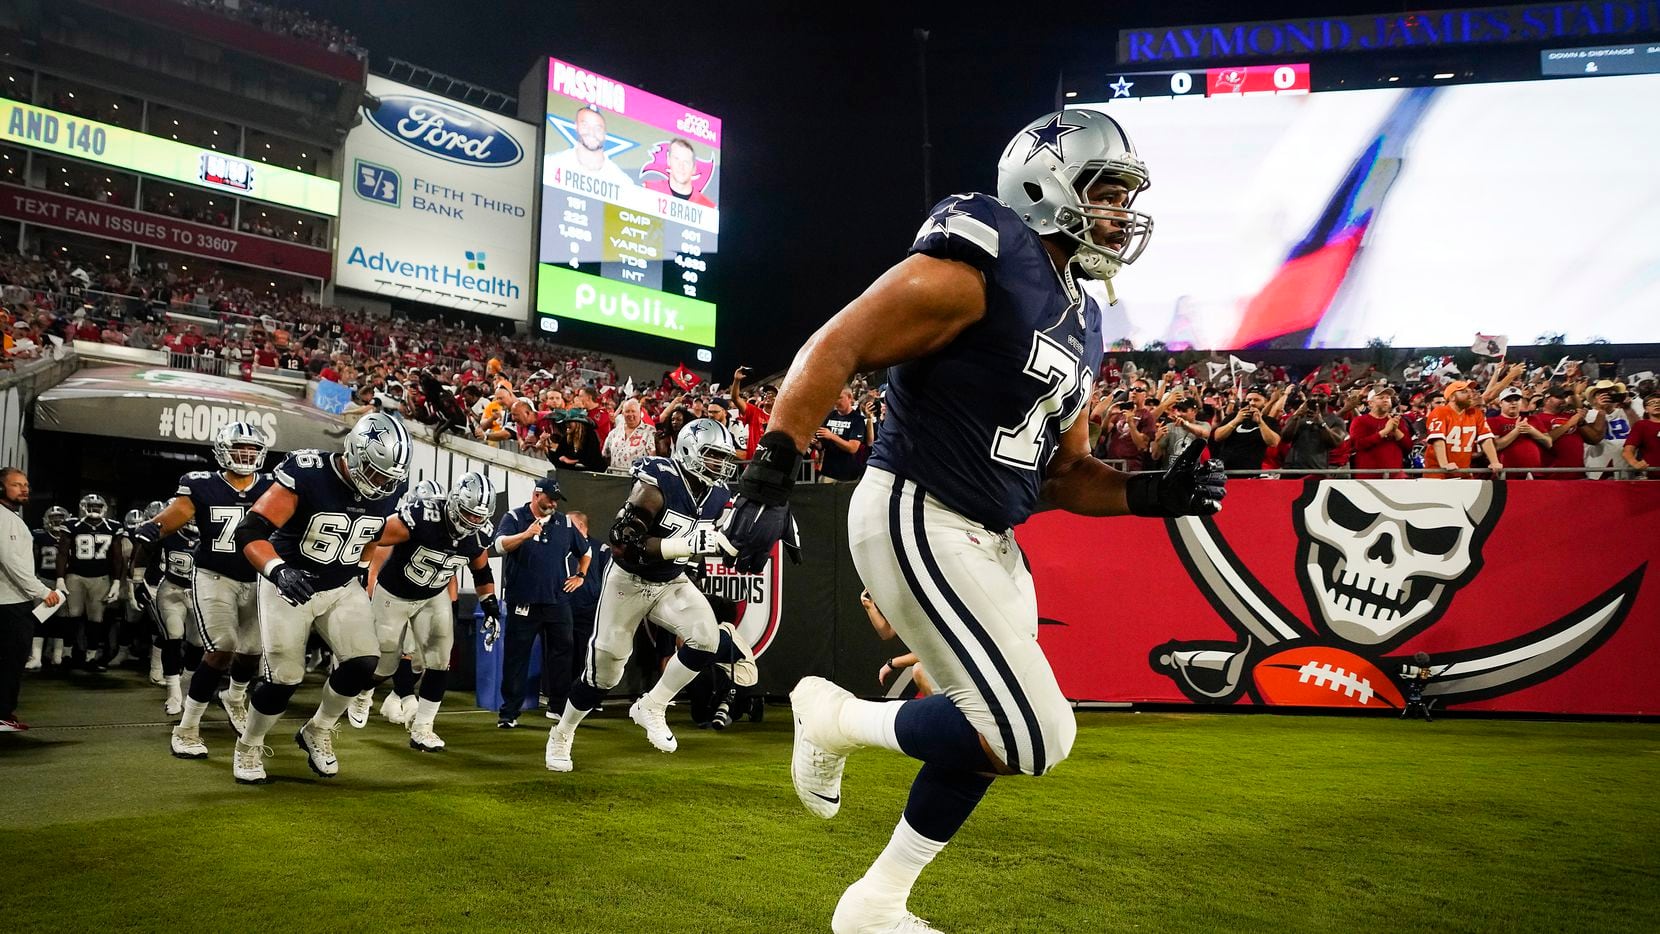 Dallas Cowboys offensive tackle La'el Collins (71) leads teammates onto the field before an NFL football game against the Tampa Bay Buccaneers at Raymond James Stadium on Thursday, Sept. 9, 2021, in Tampa, Fla.